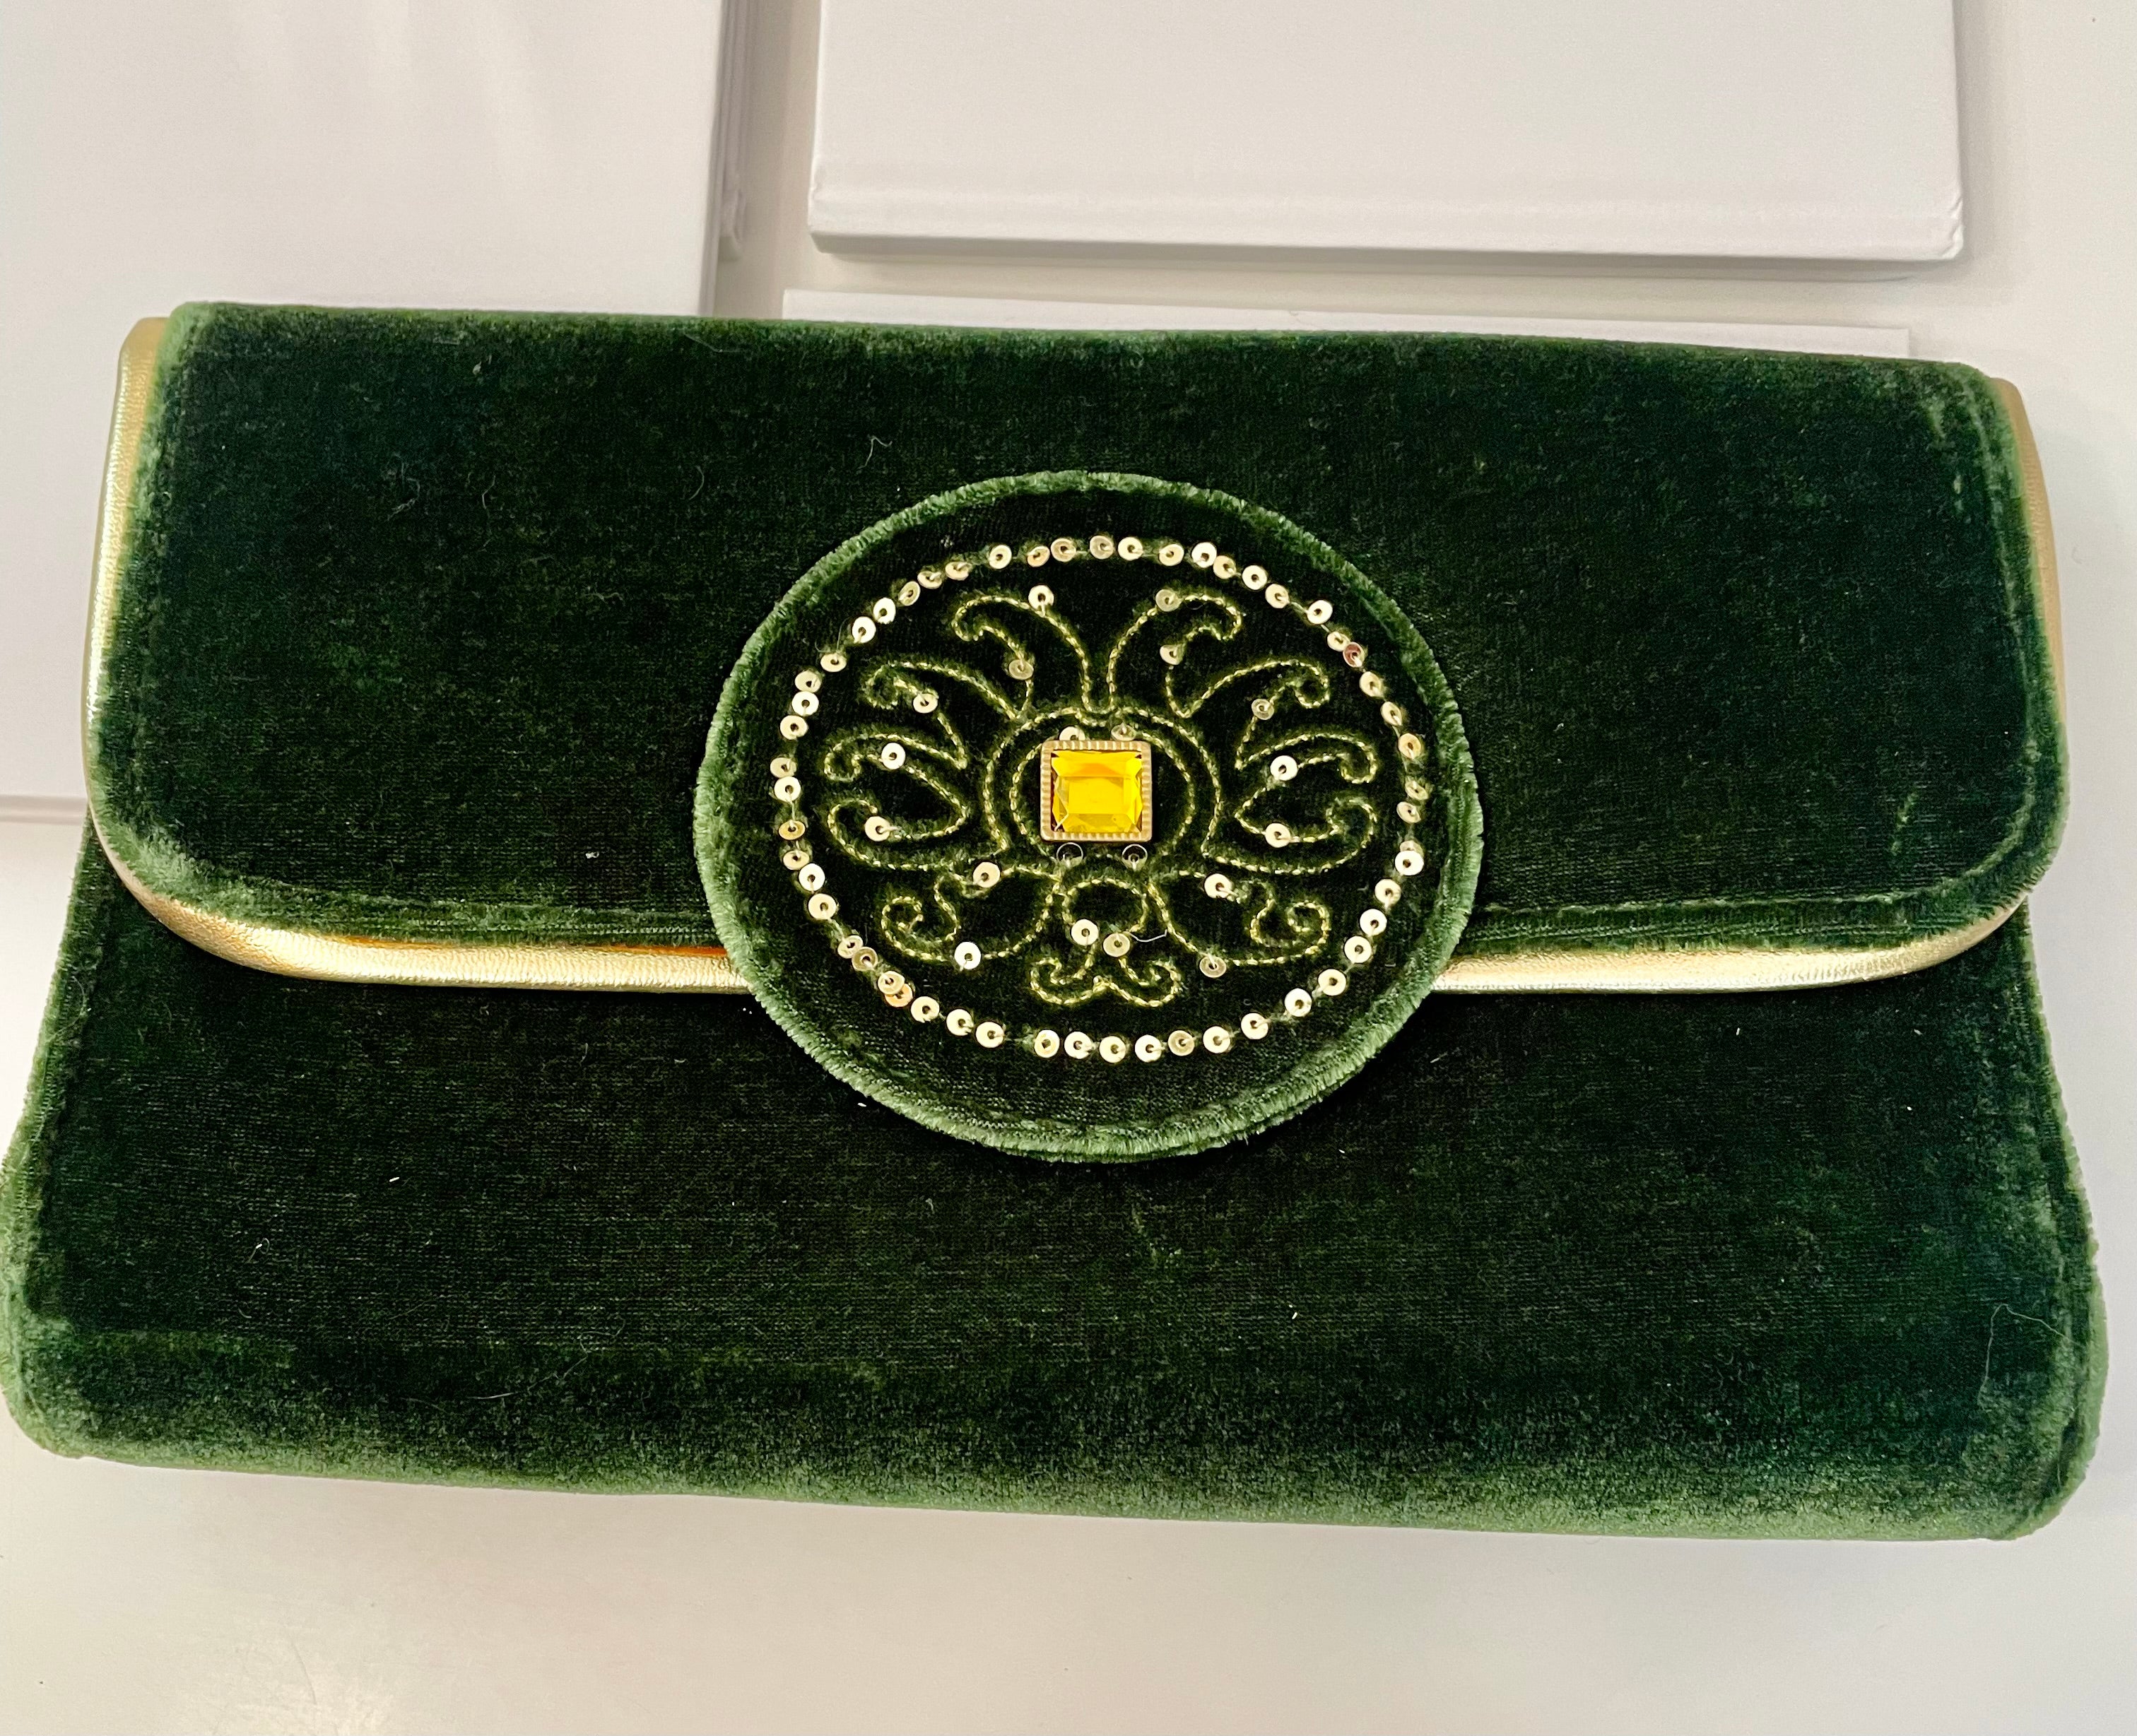 The most beautiful green velvet clutch bag, adorned with loveliest gold stone, and sequins... so elegant